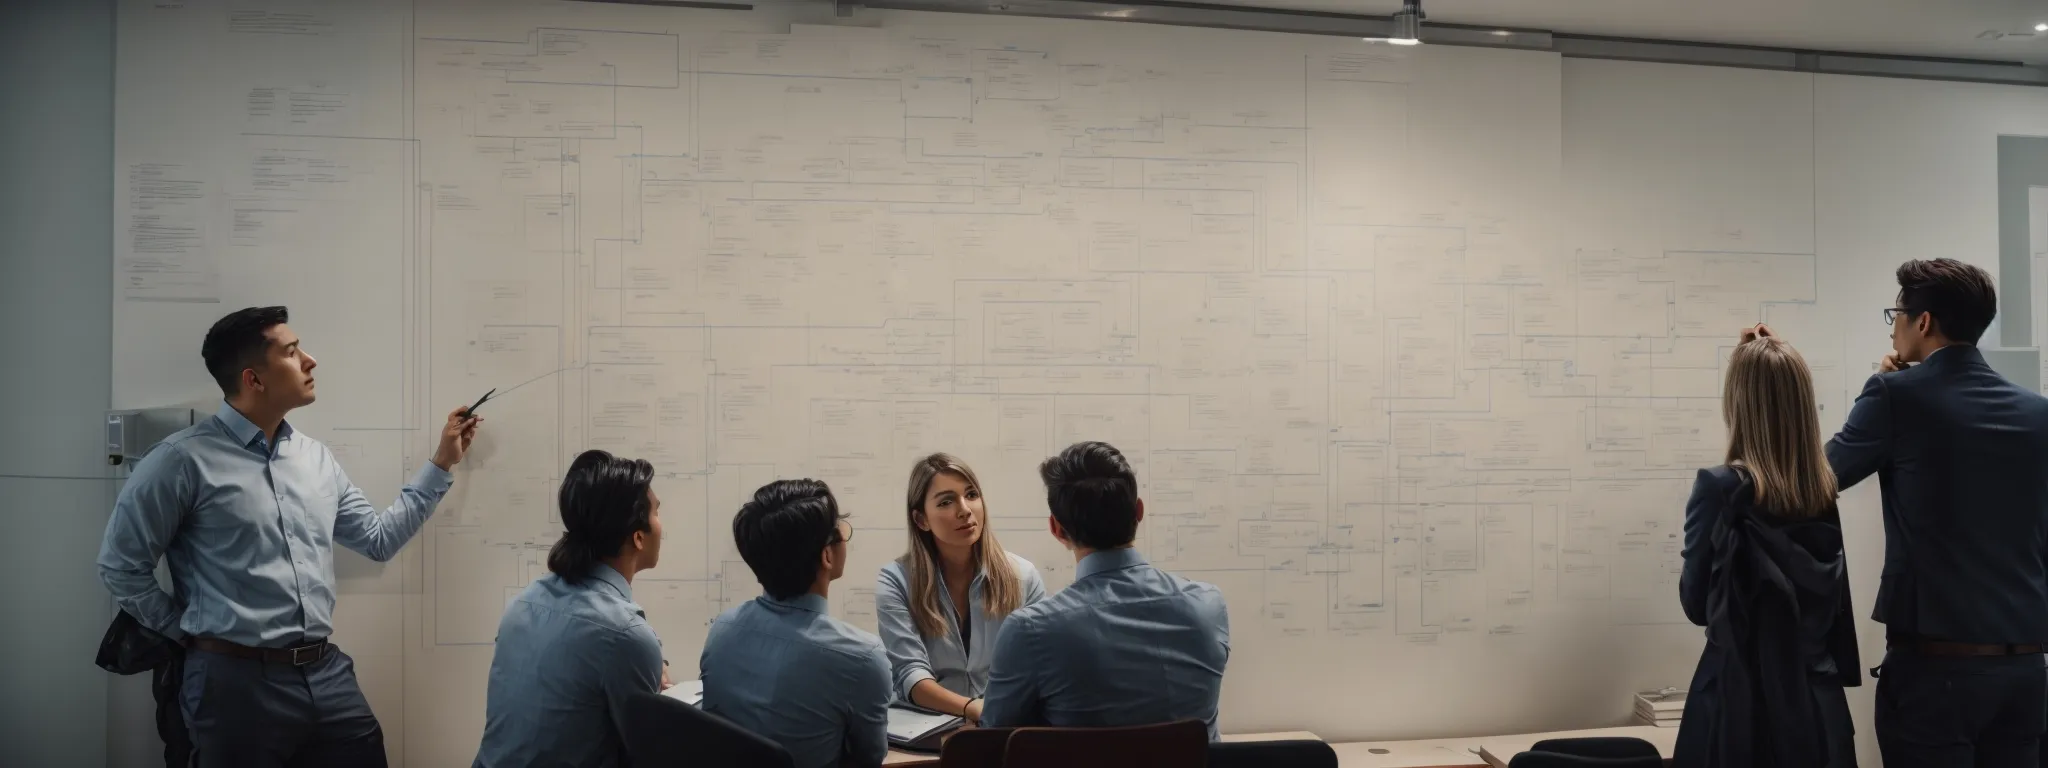 a team of strategists analyzing a large visible flowchart on the wall to optimize website content for search engine rankings.